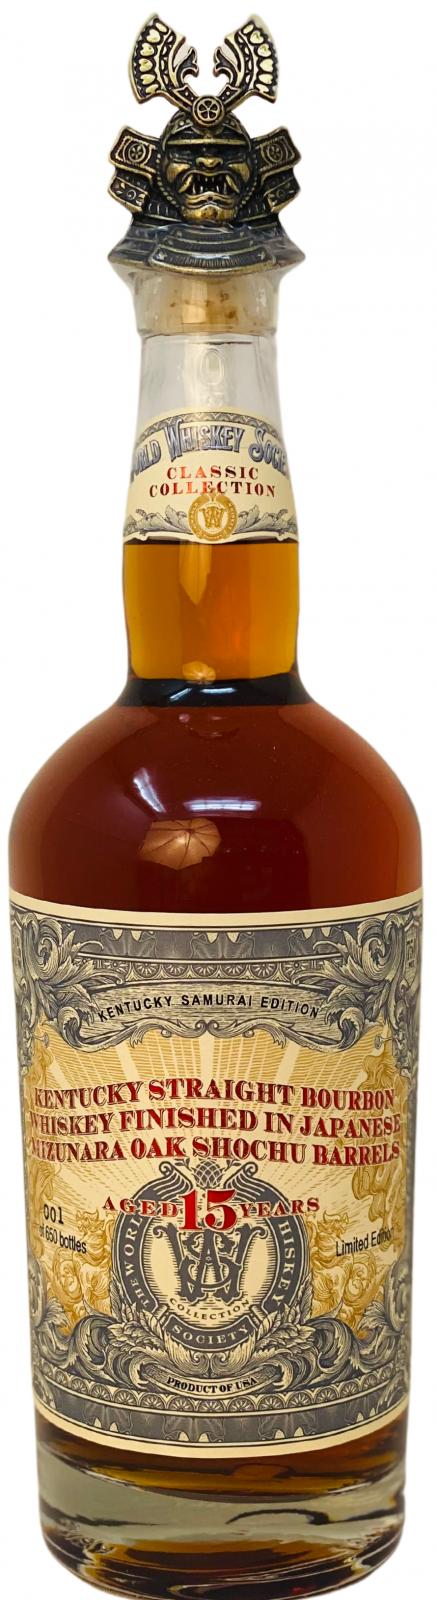 Kentucky Straight Bourbon 15 Year Old Ratings And Reviews Whiskybase